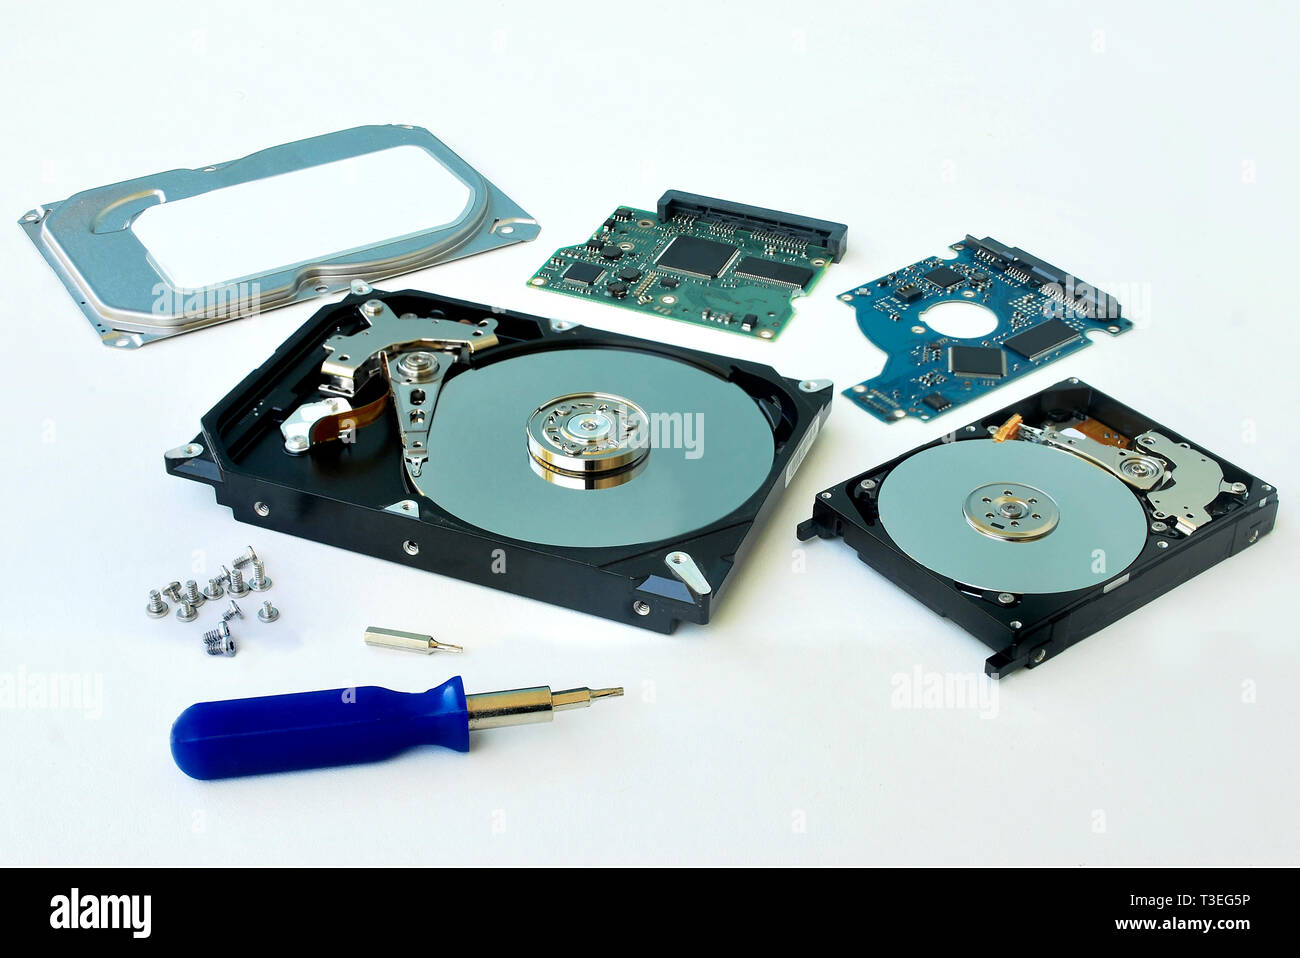 Harddisk.Repair hard disk.hdd computer appliances Stock Photo - Alamy